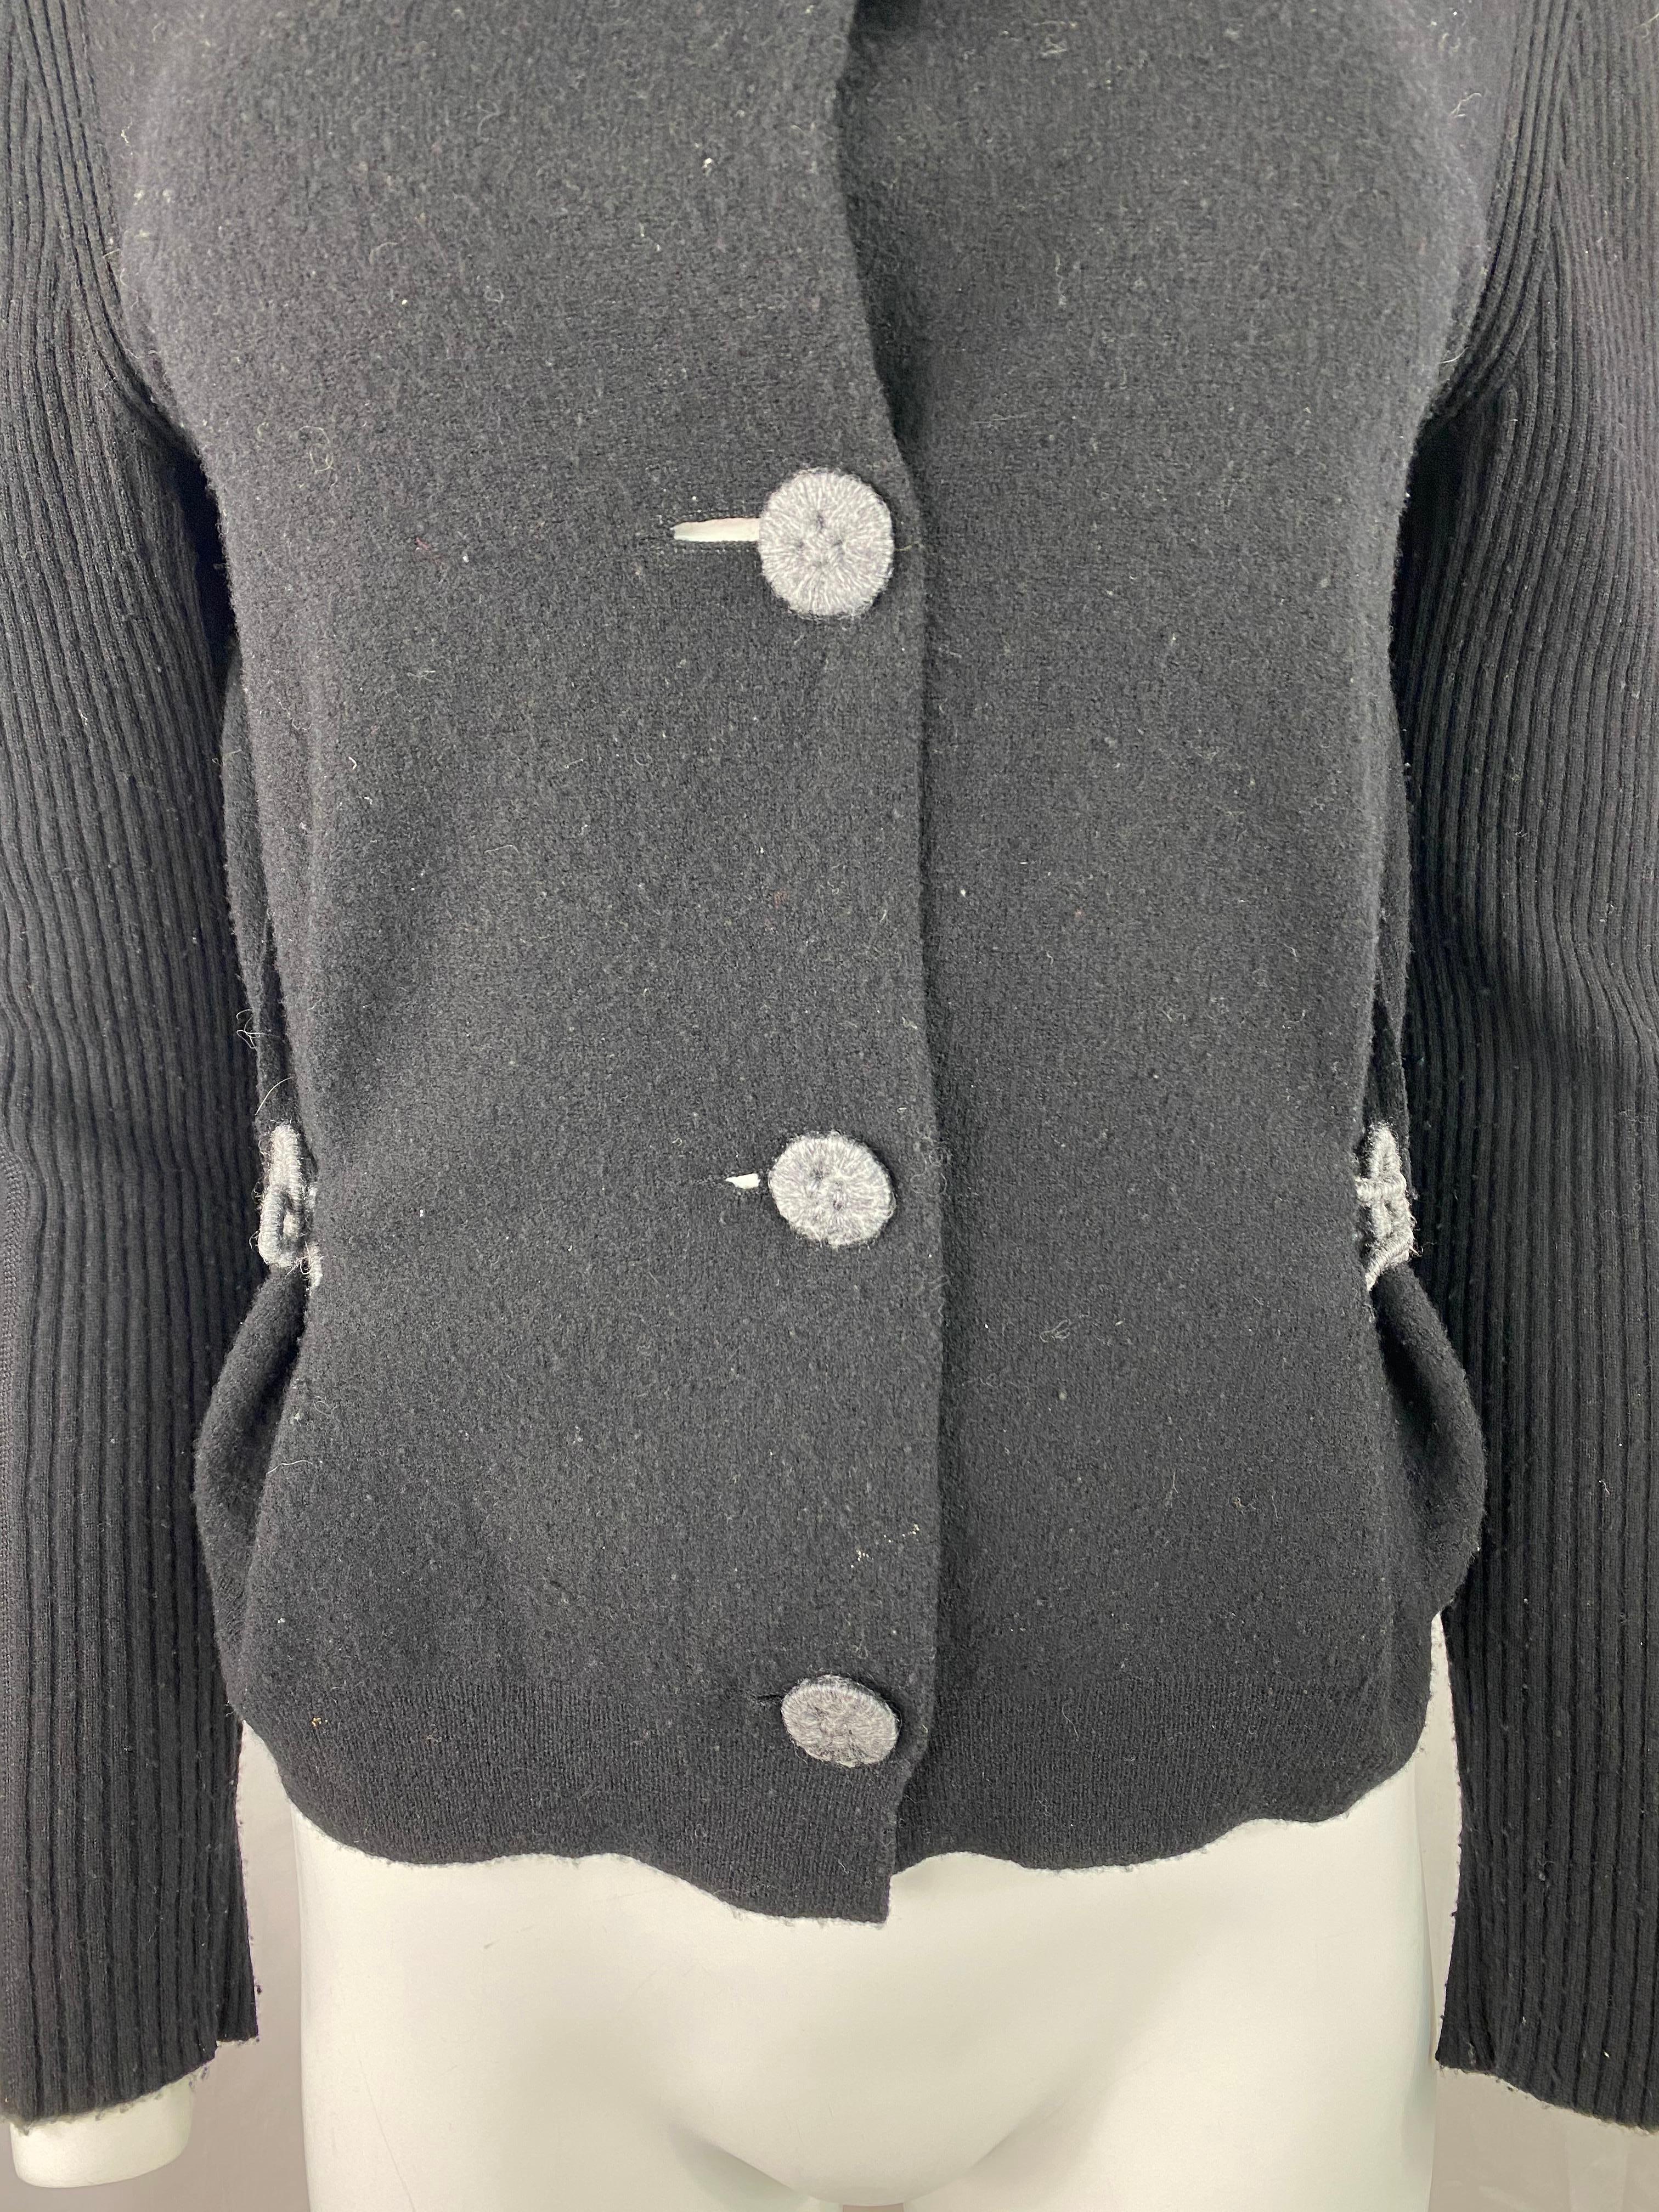 2007 Lanvin Black Wool Cardigan, Size Small In Excellent Condition For Sale In Beverly Hills, CA